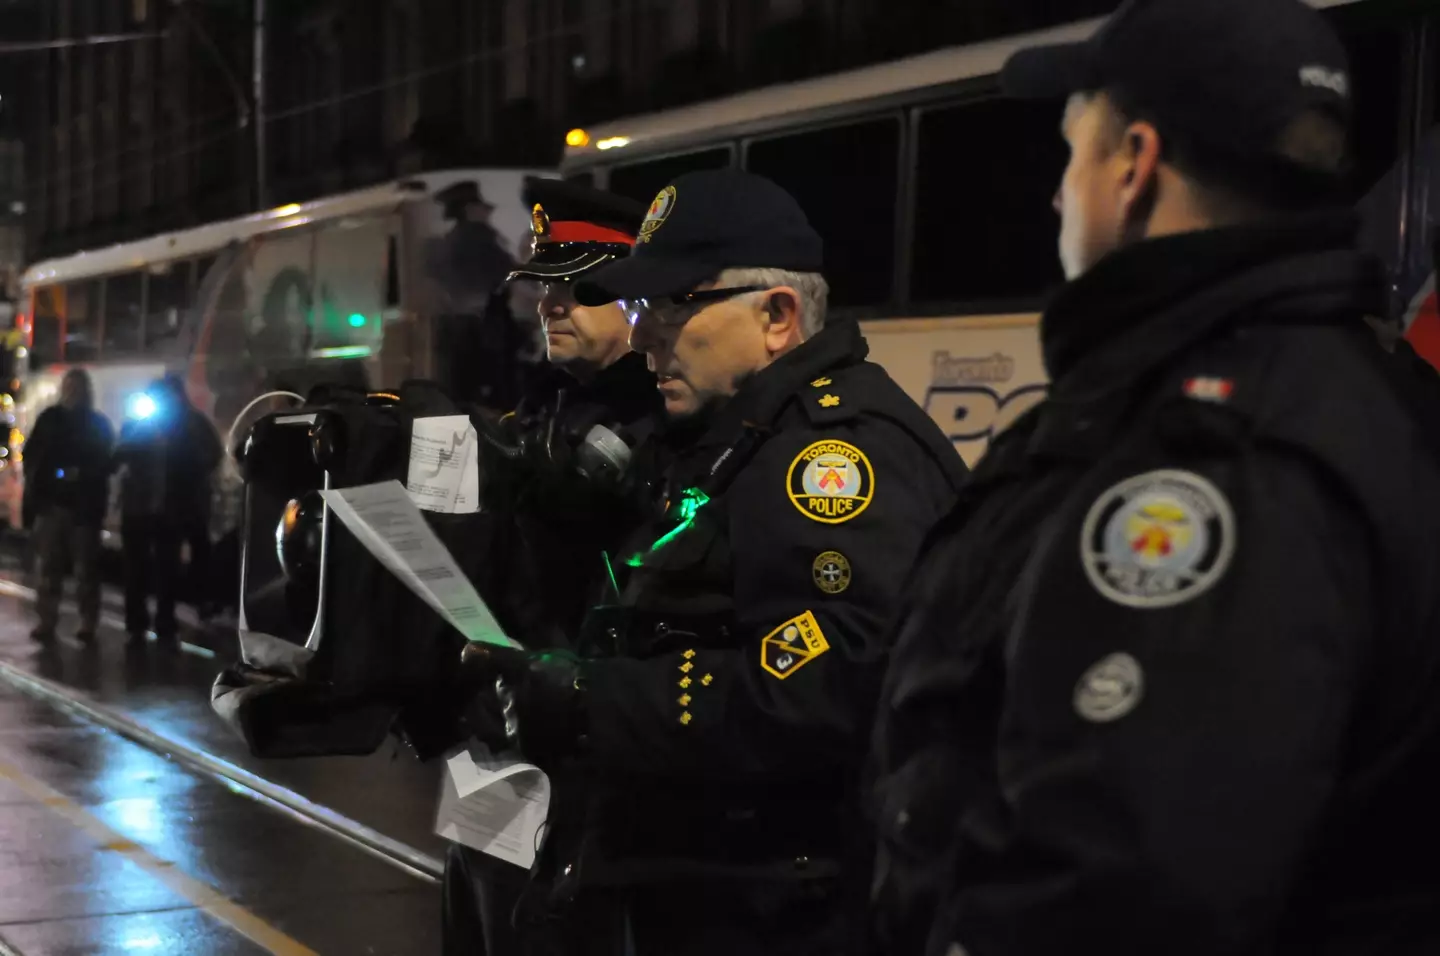 Toronto police were in a pinch with what to do next.